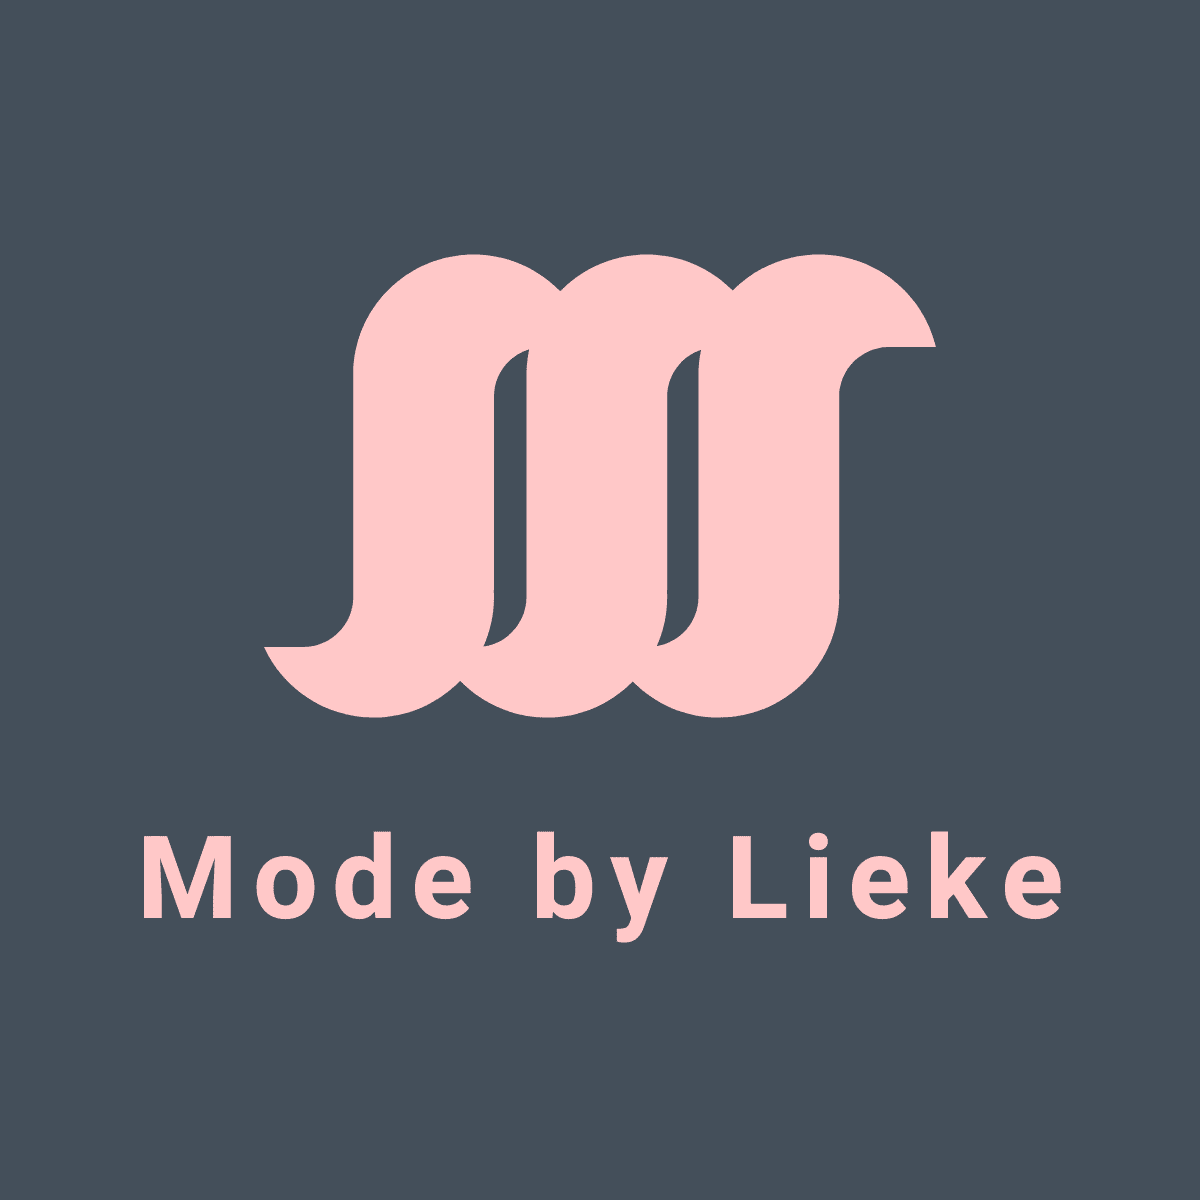 Mode by Lieke